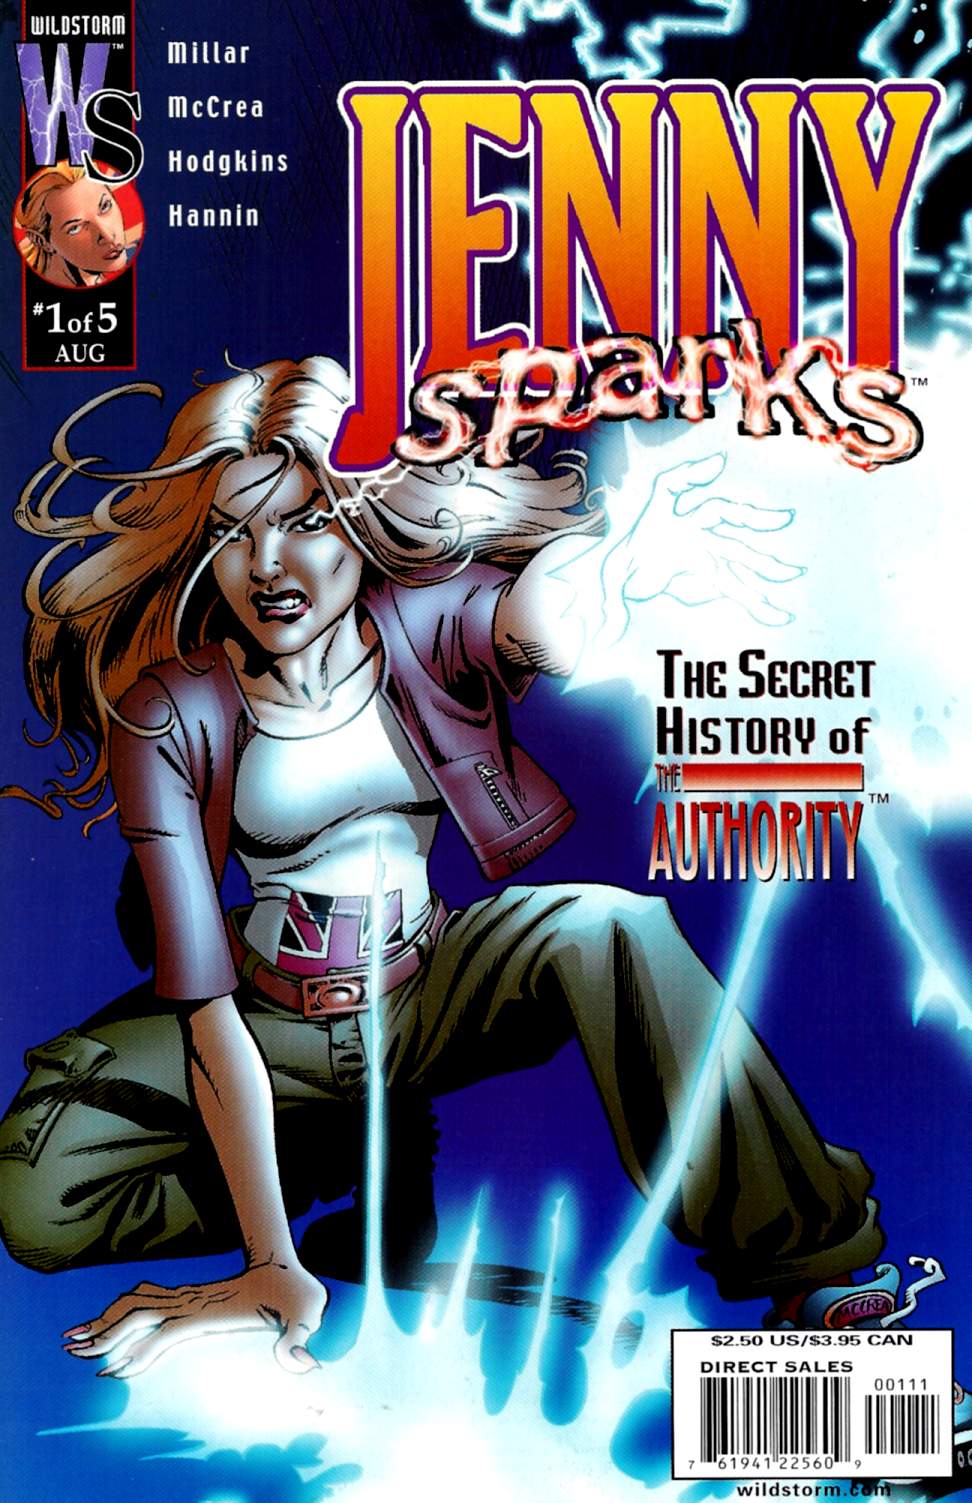 Jenny Sparks The Secret History Of The Authority Vol 1 1 - 